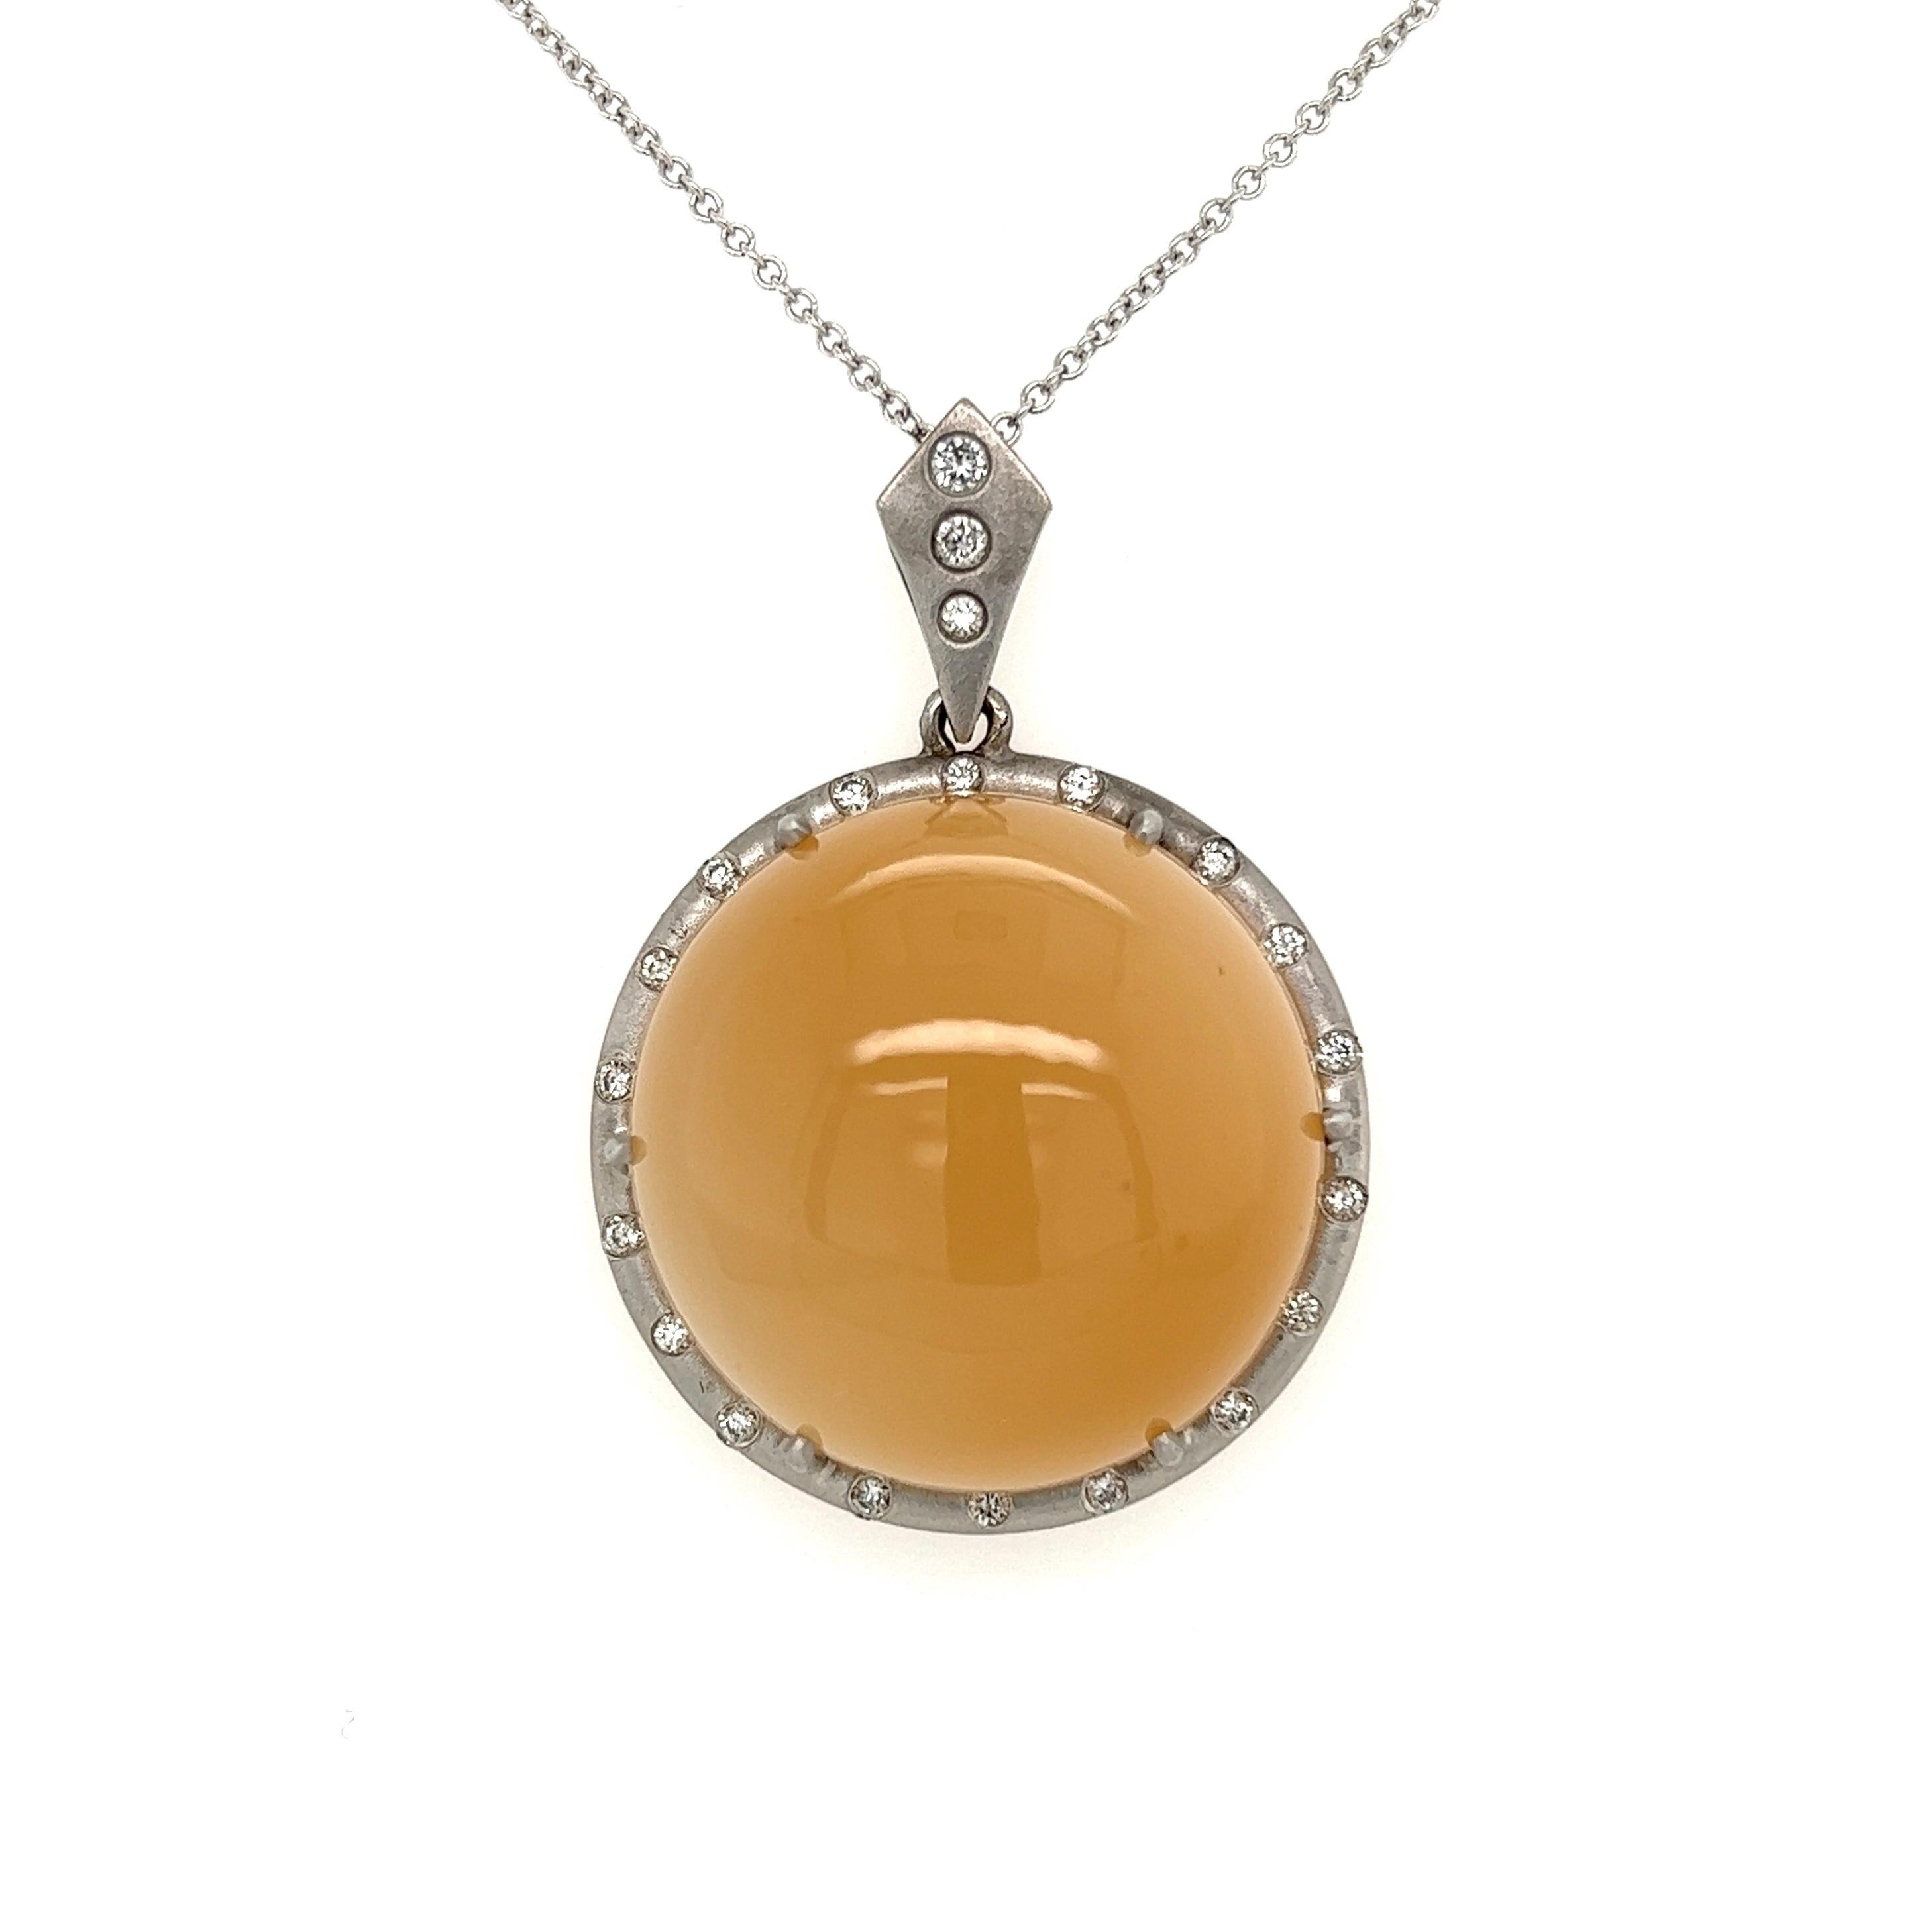 Simply Beautiful! Finely detailed Art Deco Revival Moonstone and Diamond Gold Pendant Necklace. Centering a securely nestled Hand set 60 Carat Round Cabochon Moonstone, surrounded by Scattered Diamonds, weighing approx. 0.45tcw. Hand crafted in 18K